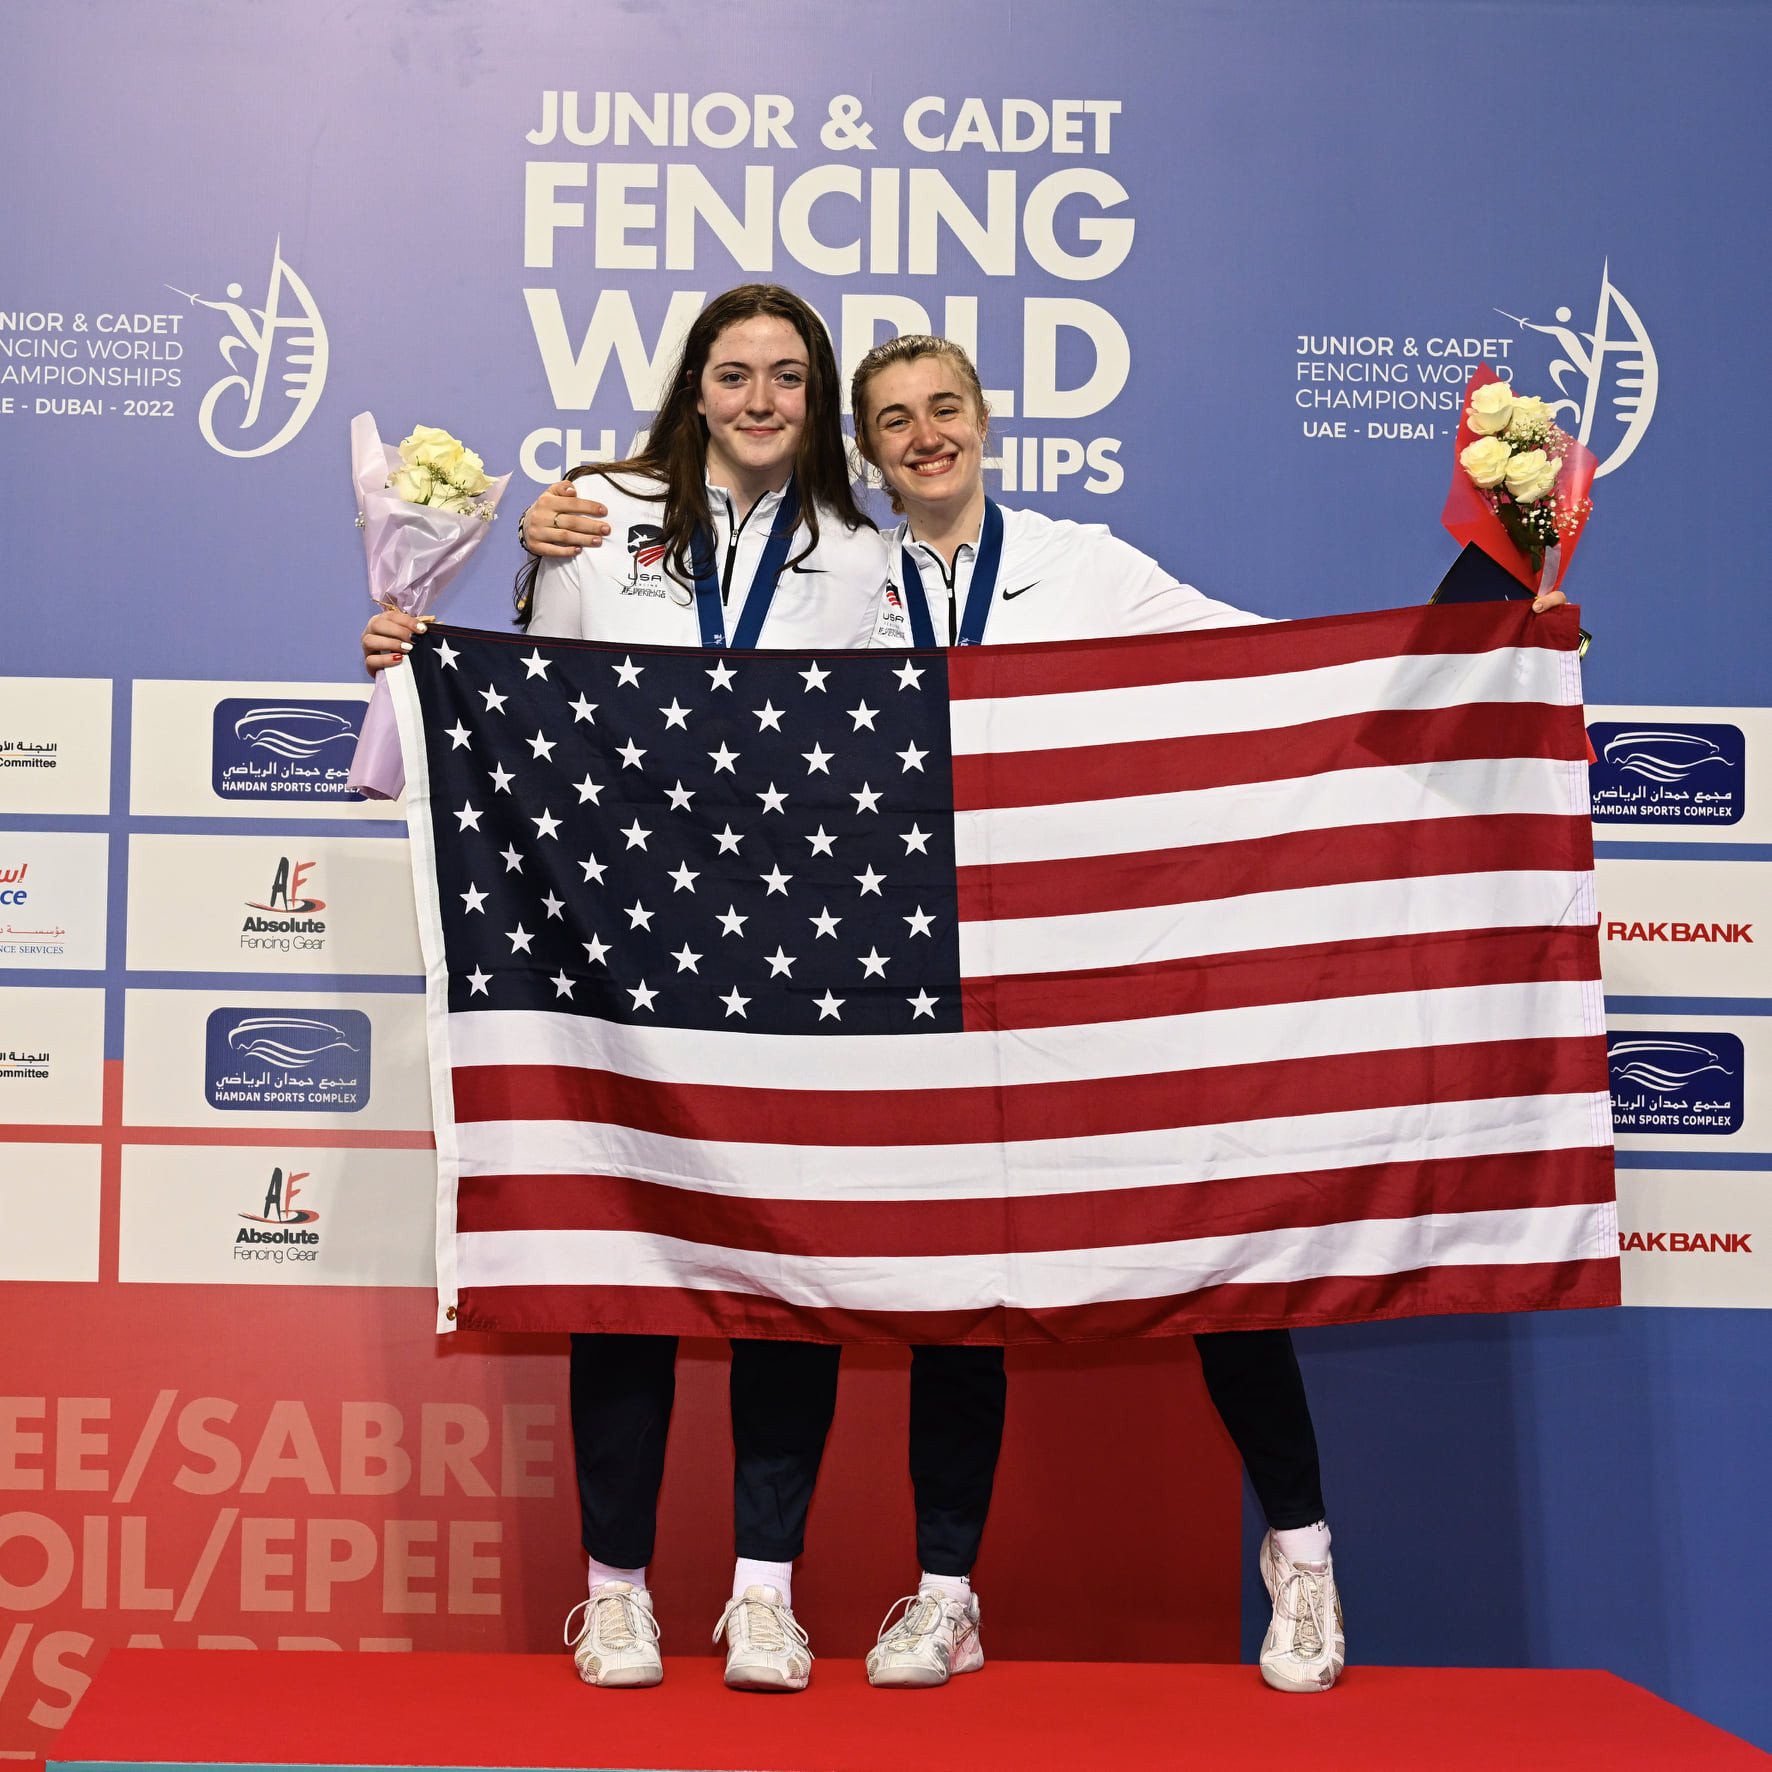 Skarbonkiewicz wins back-to-back titles at Junior and Cadet Fencing World Championships